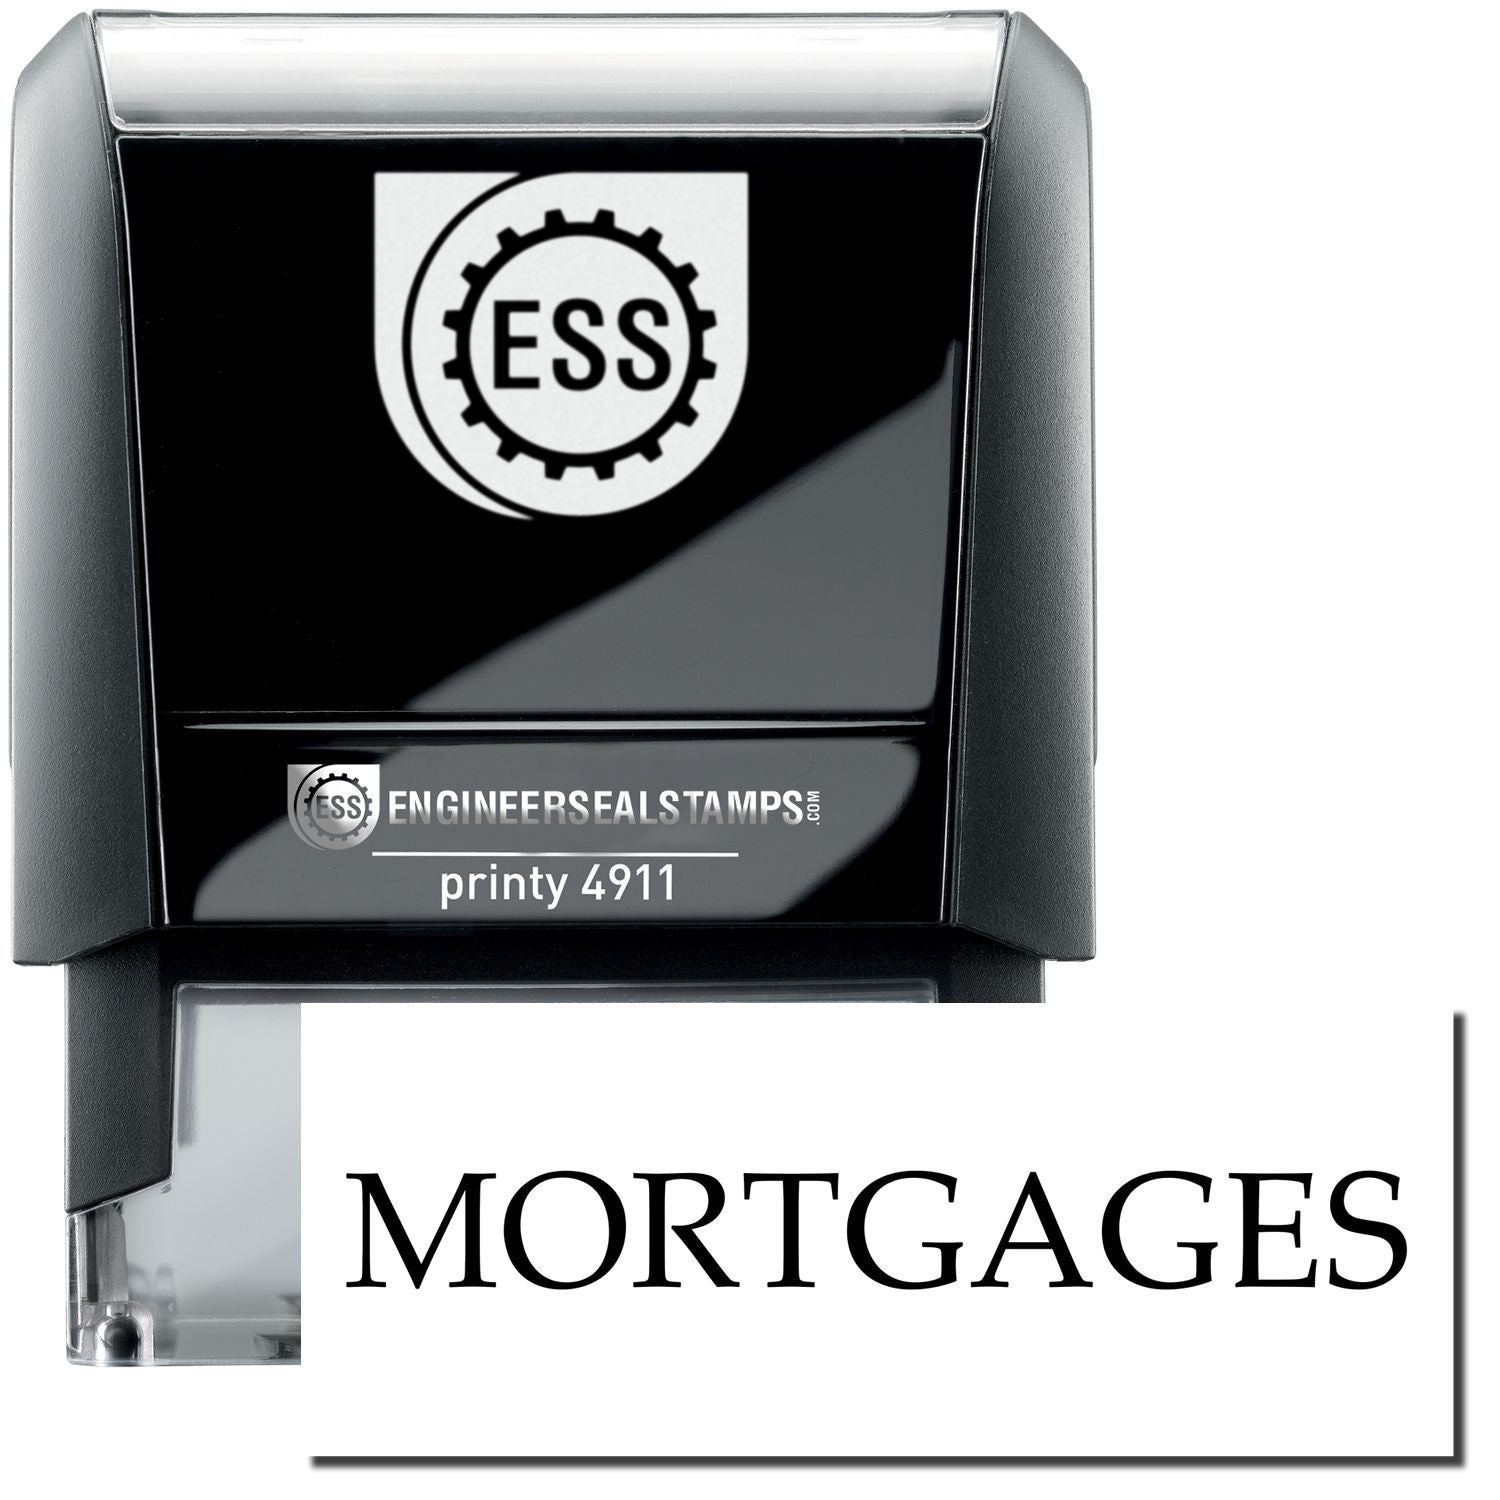 A self-inking stamp with a stamped image showing how the text "MORTGAGES" is displayed after stamping.